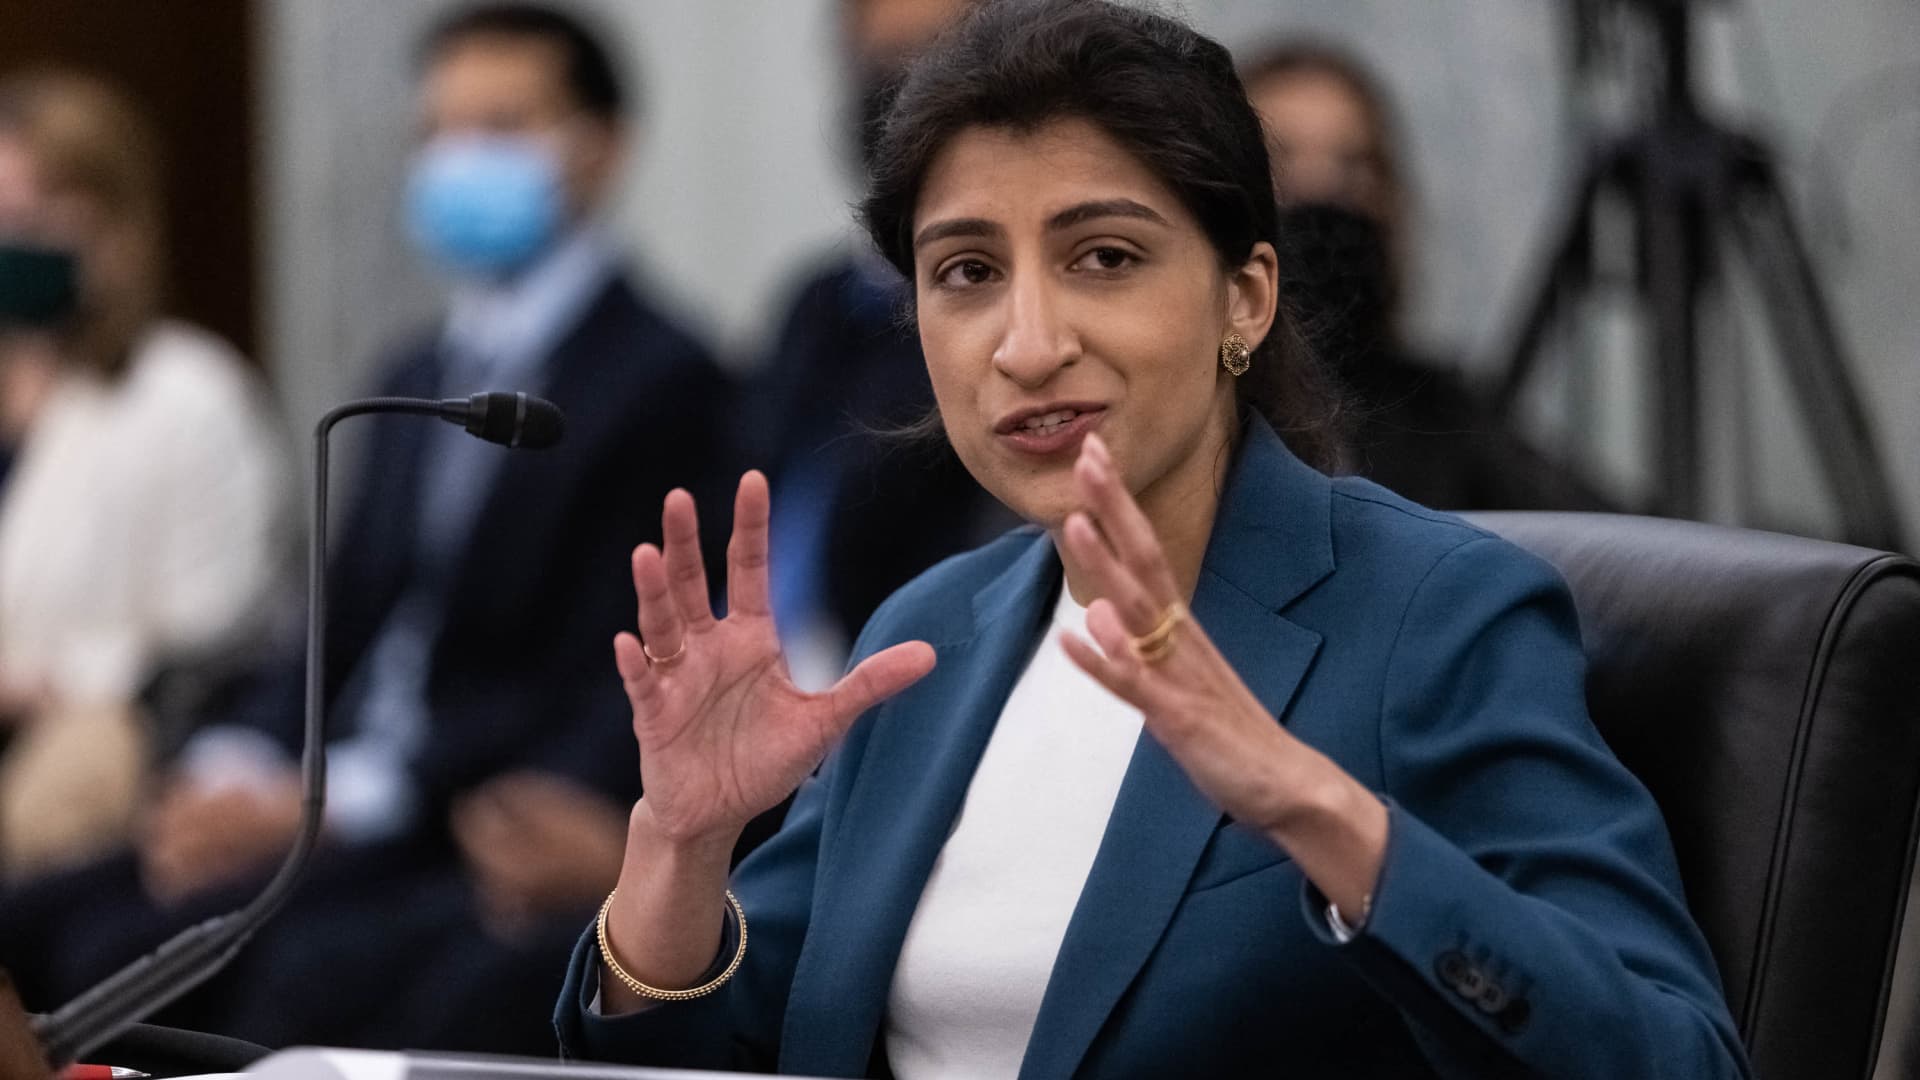 FTC's Lina Khan presses ahead with sprawling antitrust plans in the face of GOP opposition